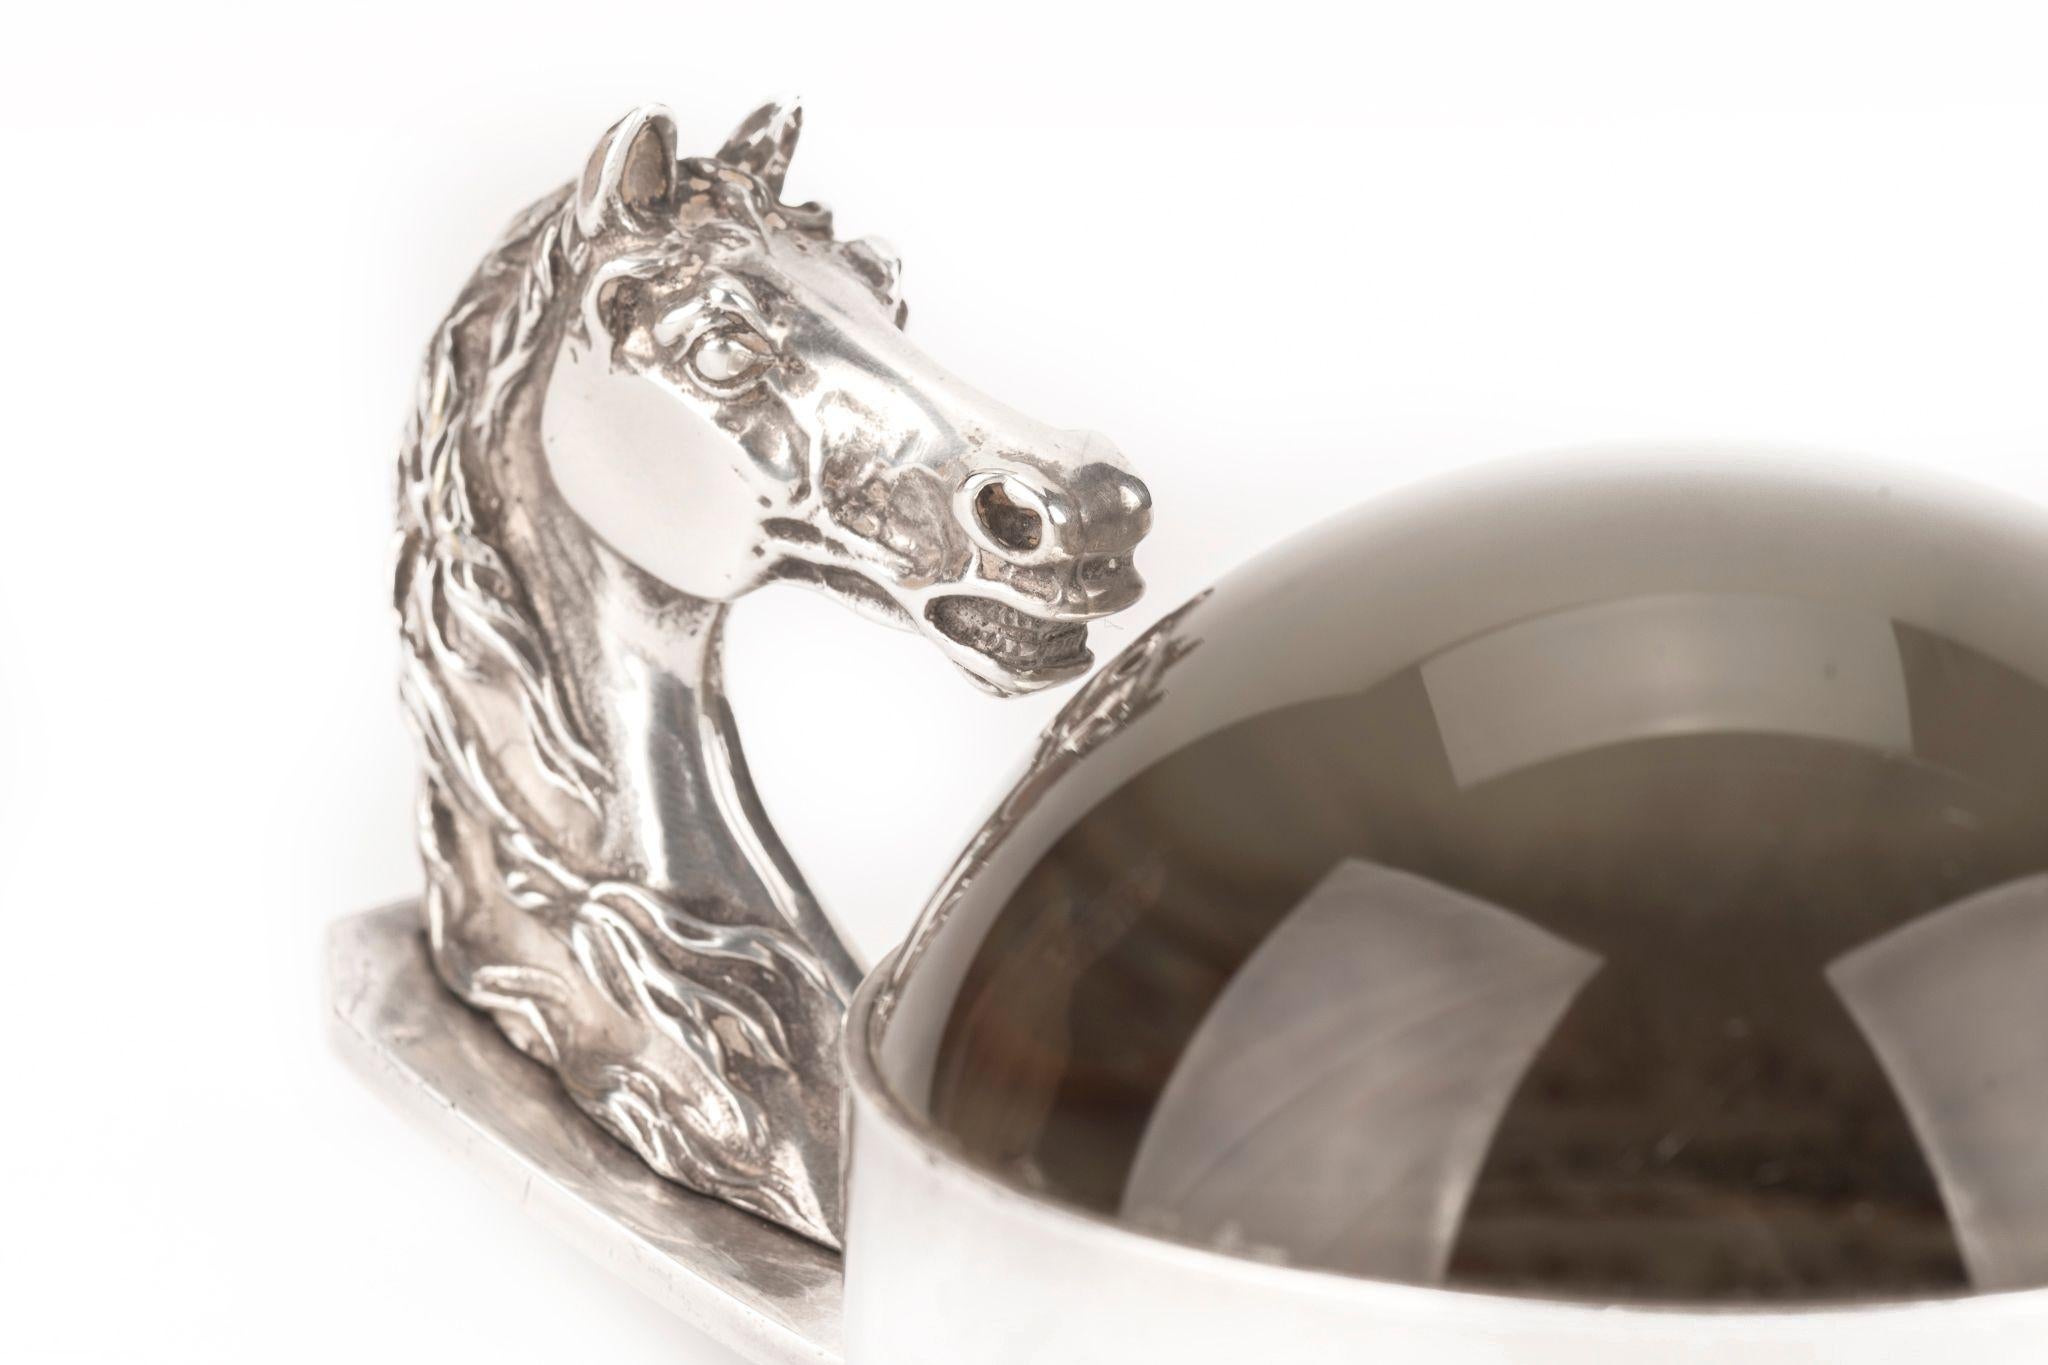 Hermès vintage collectible paperweight /magnifying lens with horse head design.
Comes  with original dust cover.